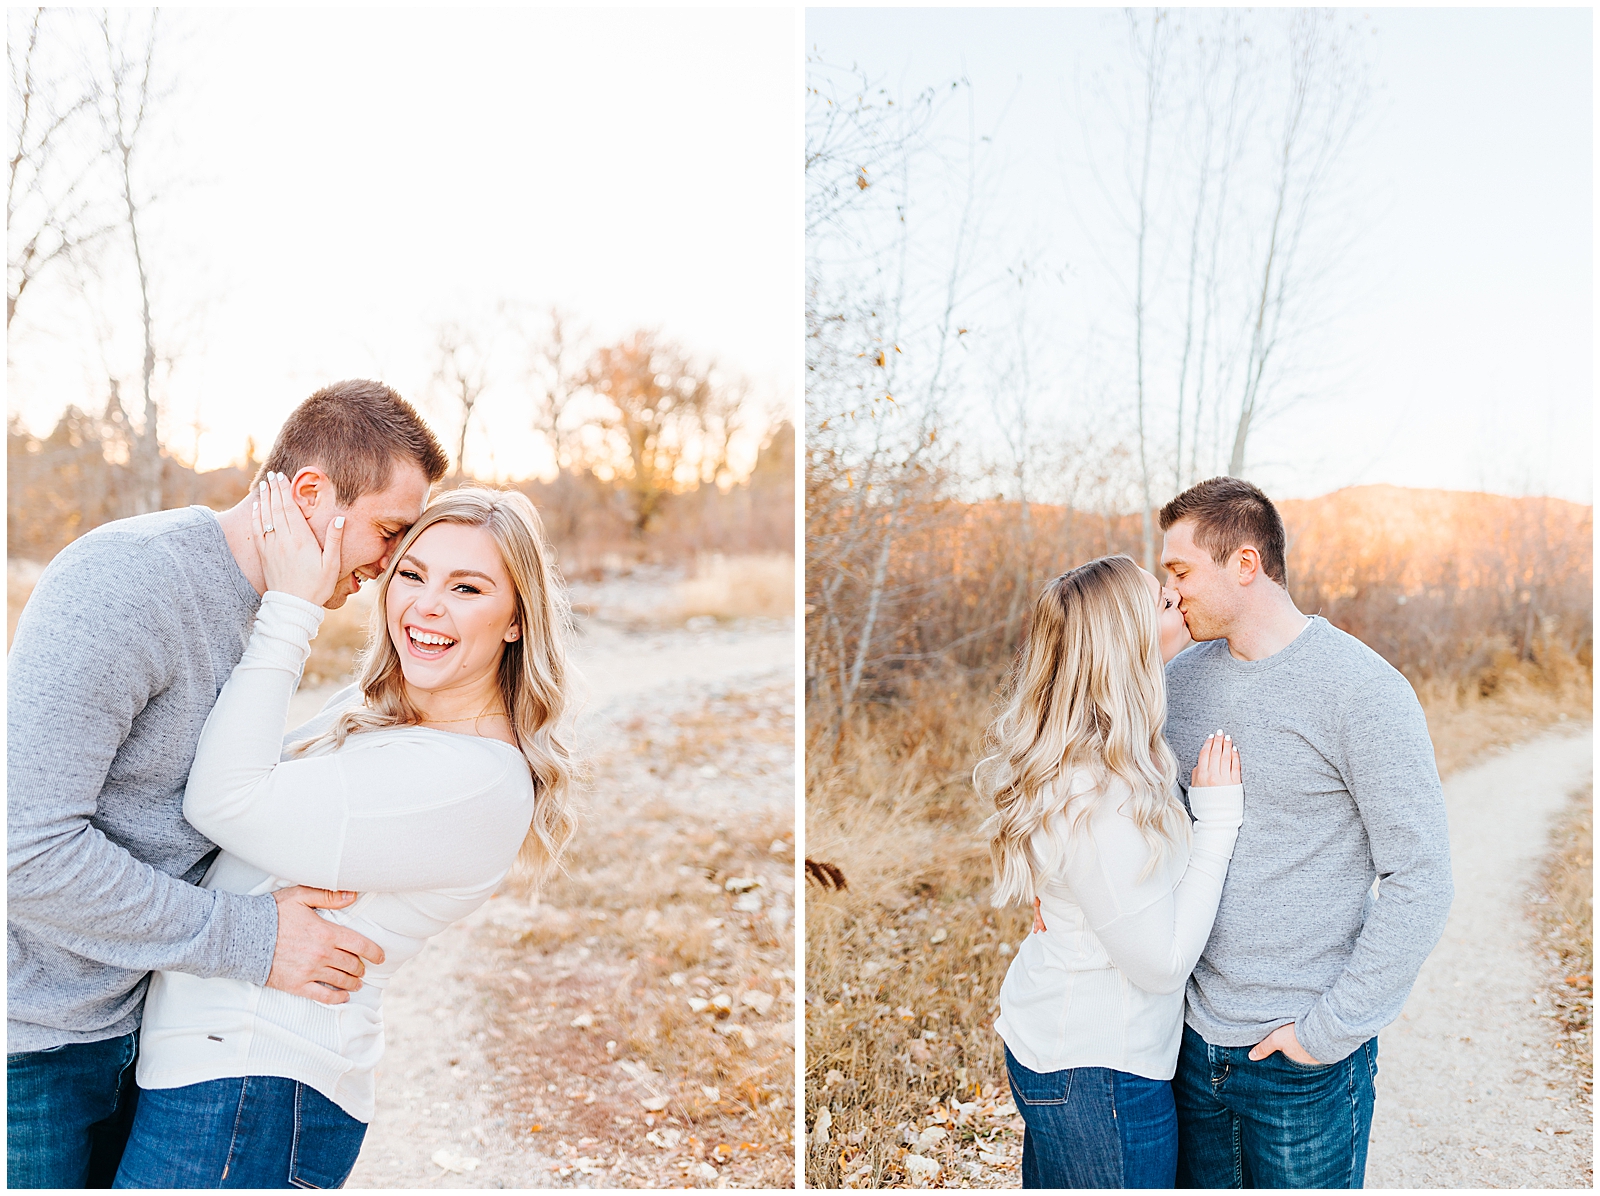 November Boise Engagement by the River